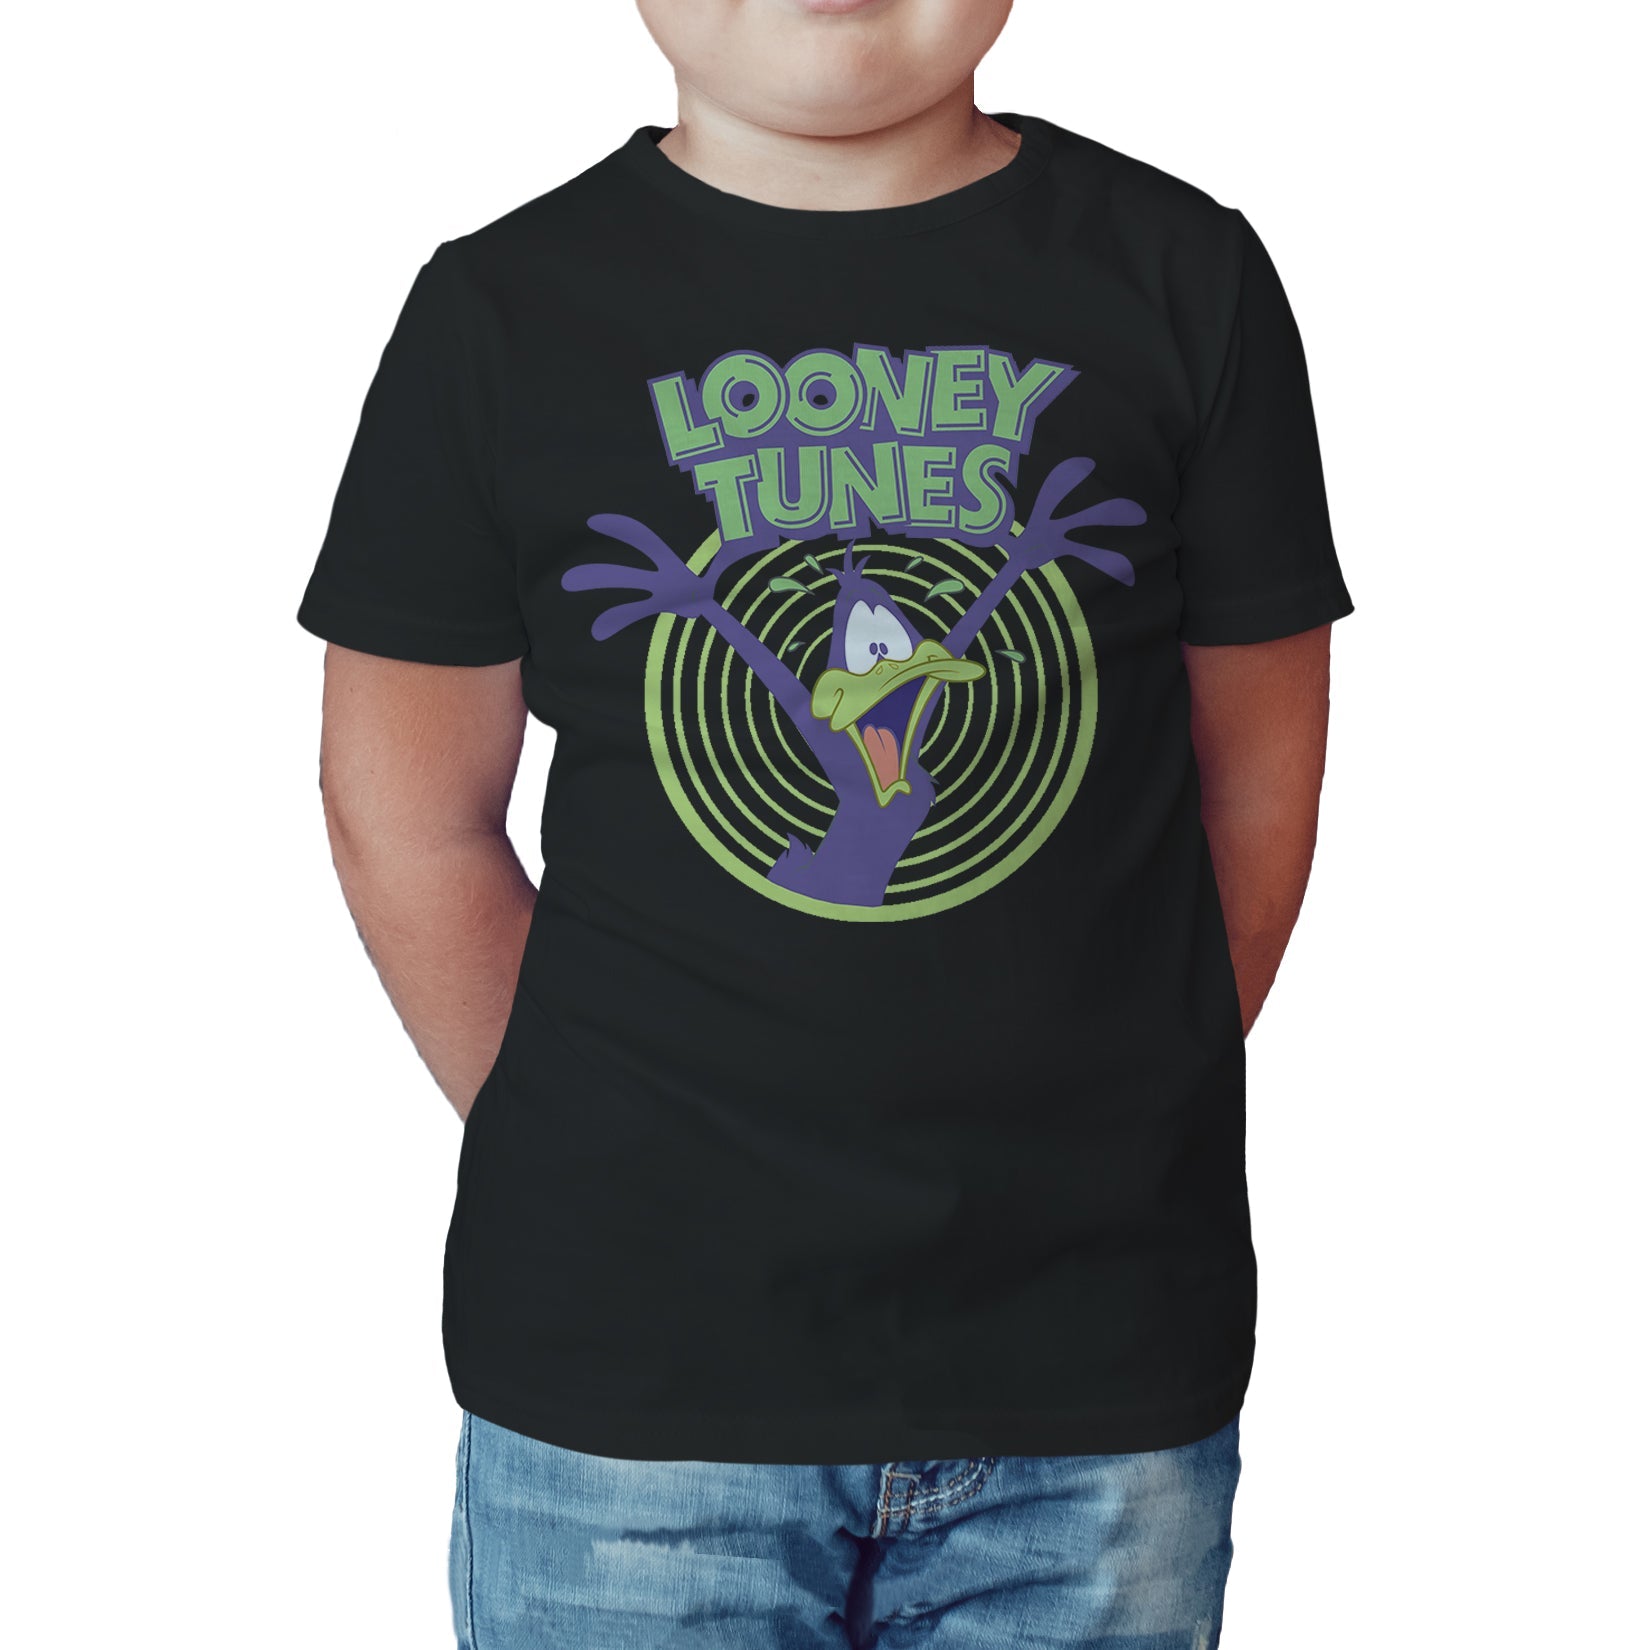 Looney Tunes Daffy Duck Logo Crazy Official Kid's T-shirt ()